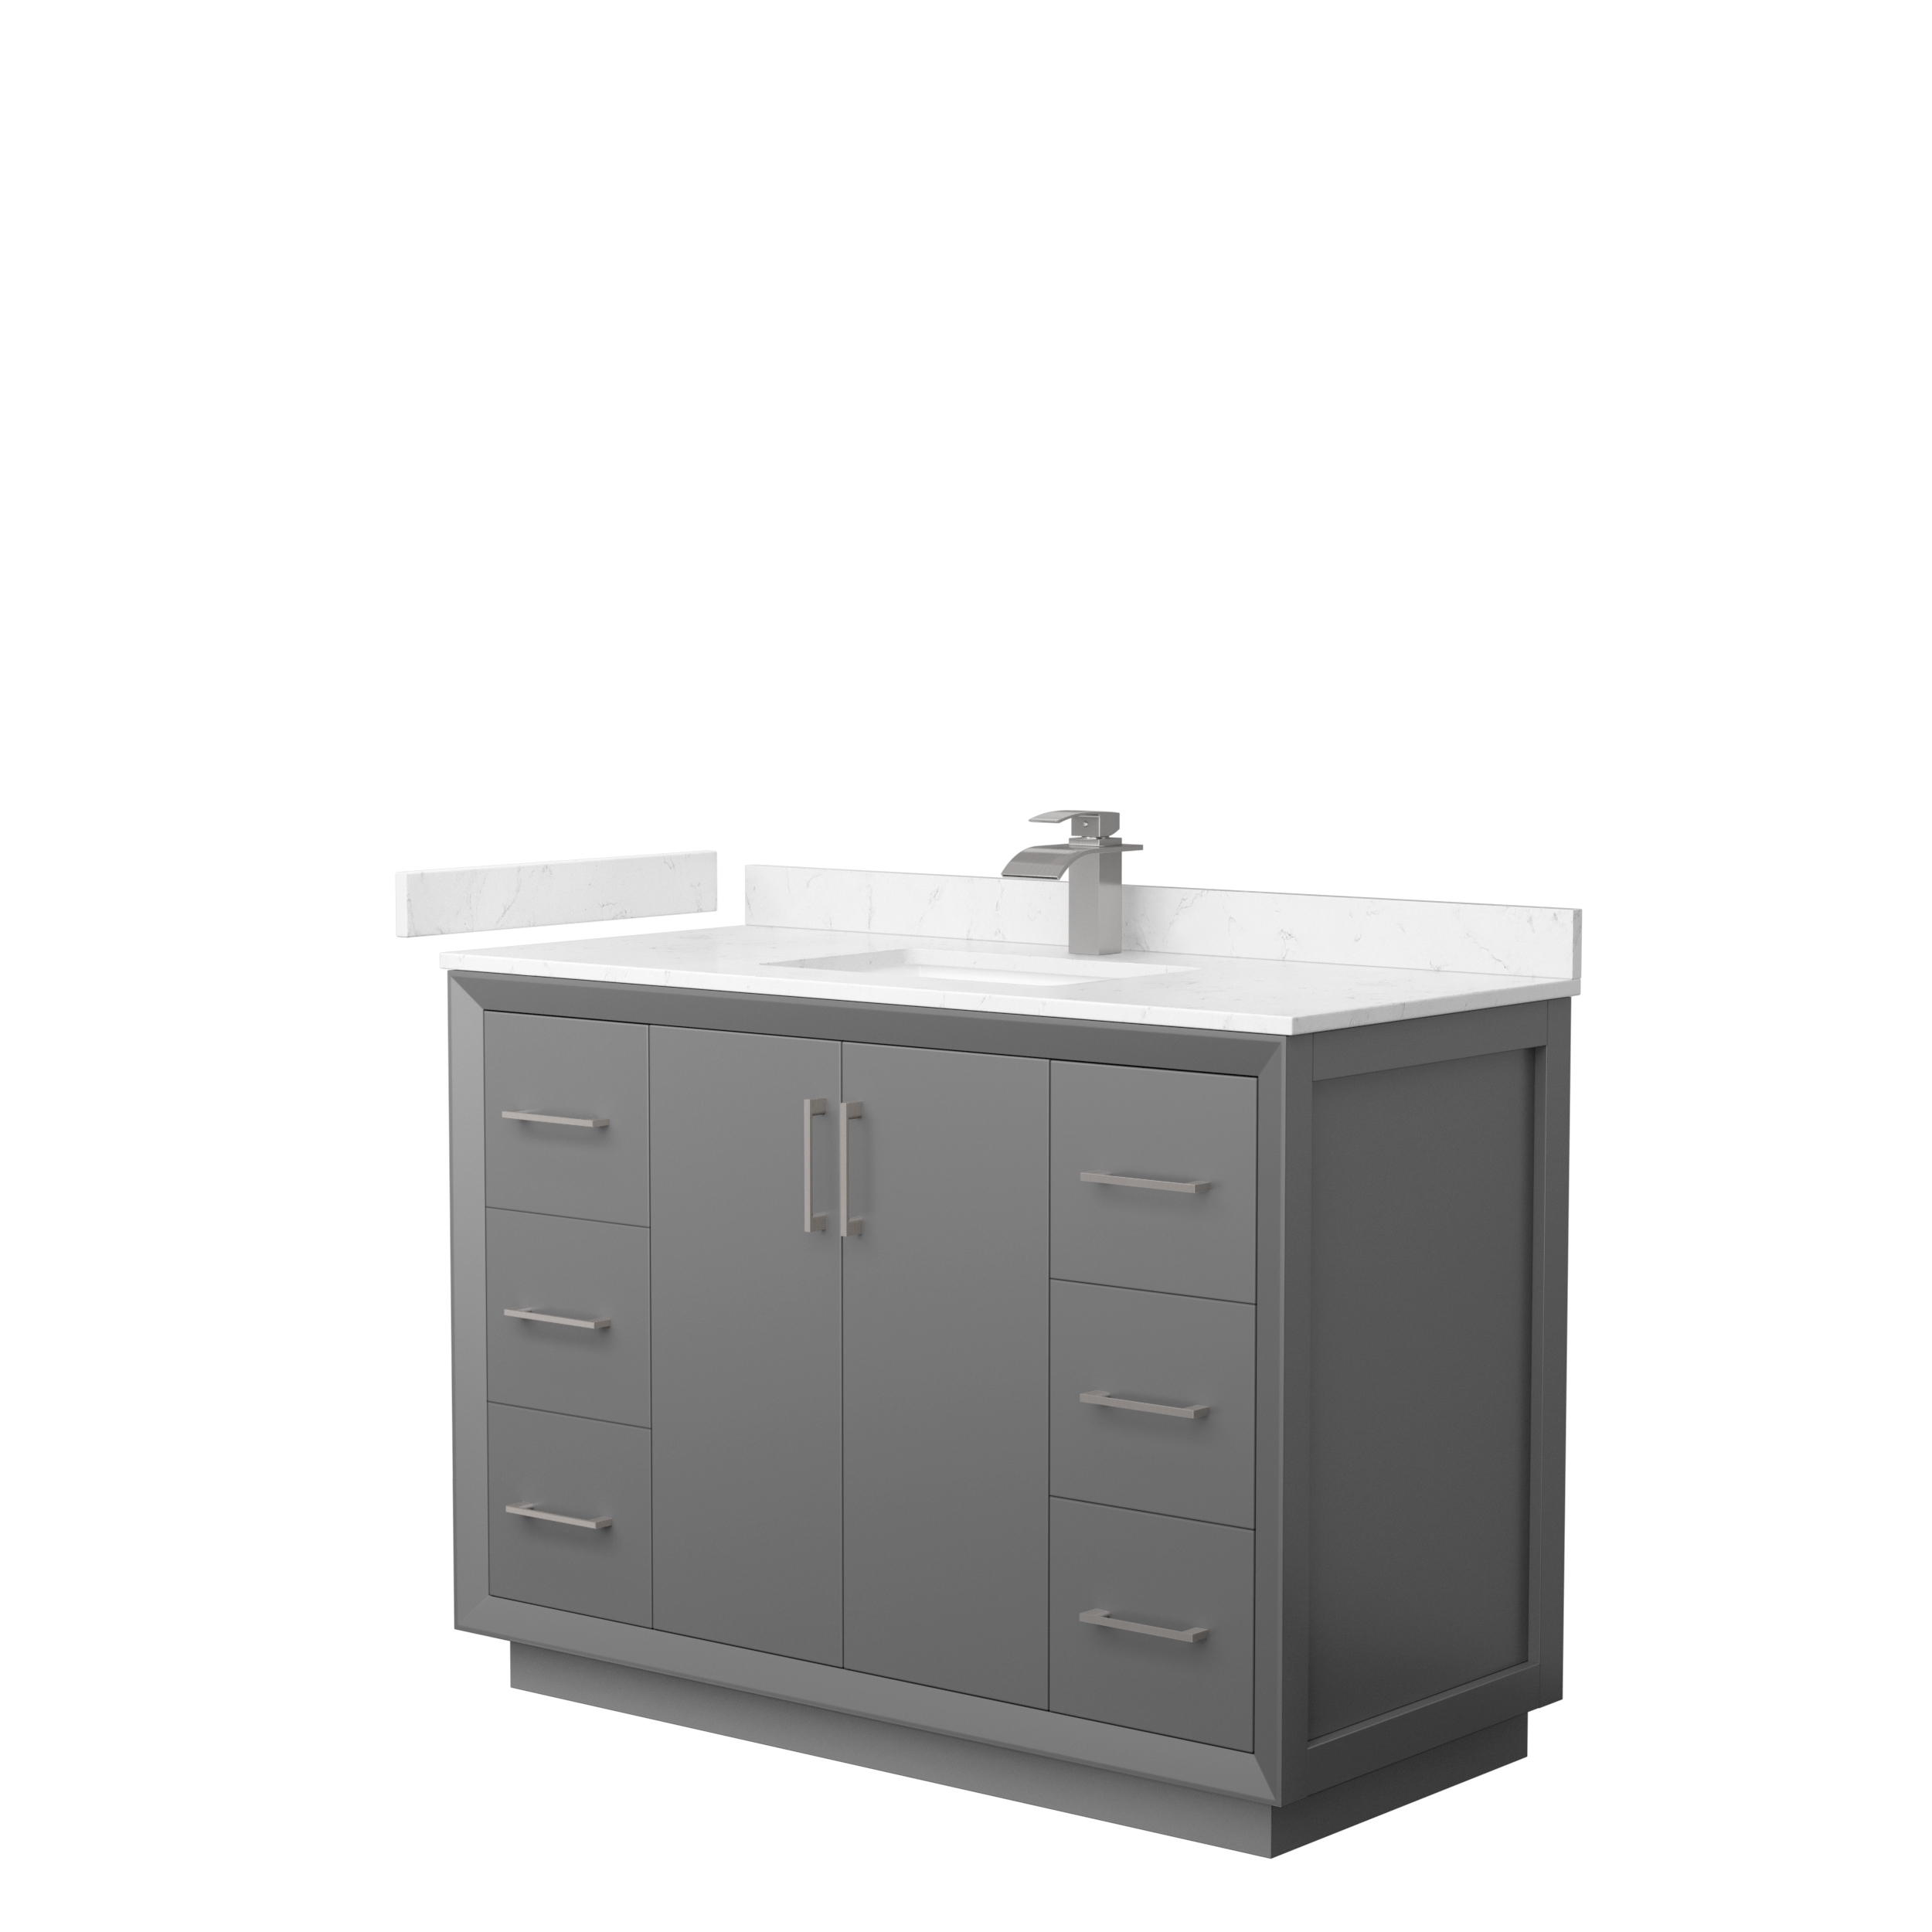 48" Single Bathroom Vanity with 3 Color Options, 3 Countertop Options, 3 Hardware Options and Mirror Options